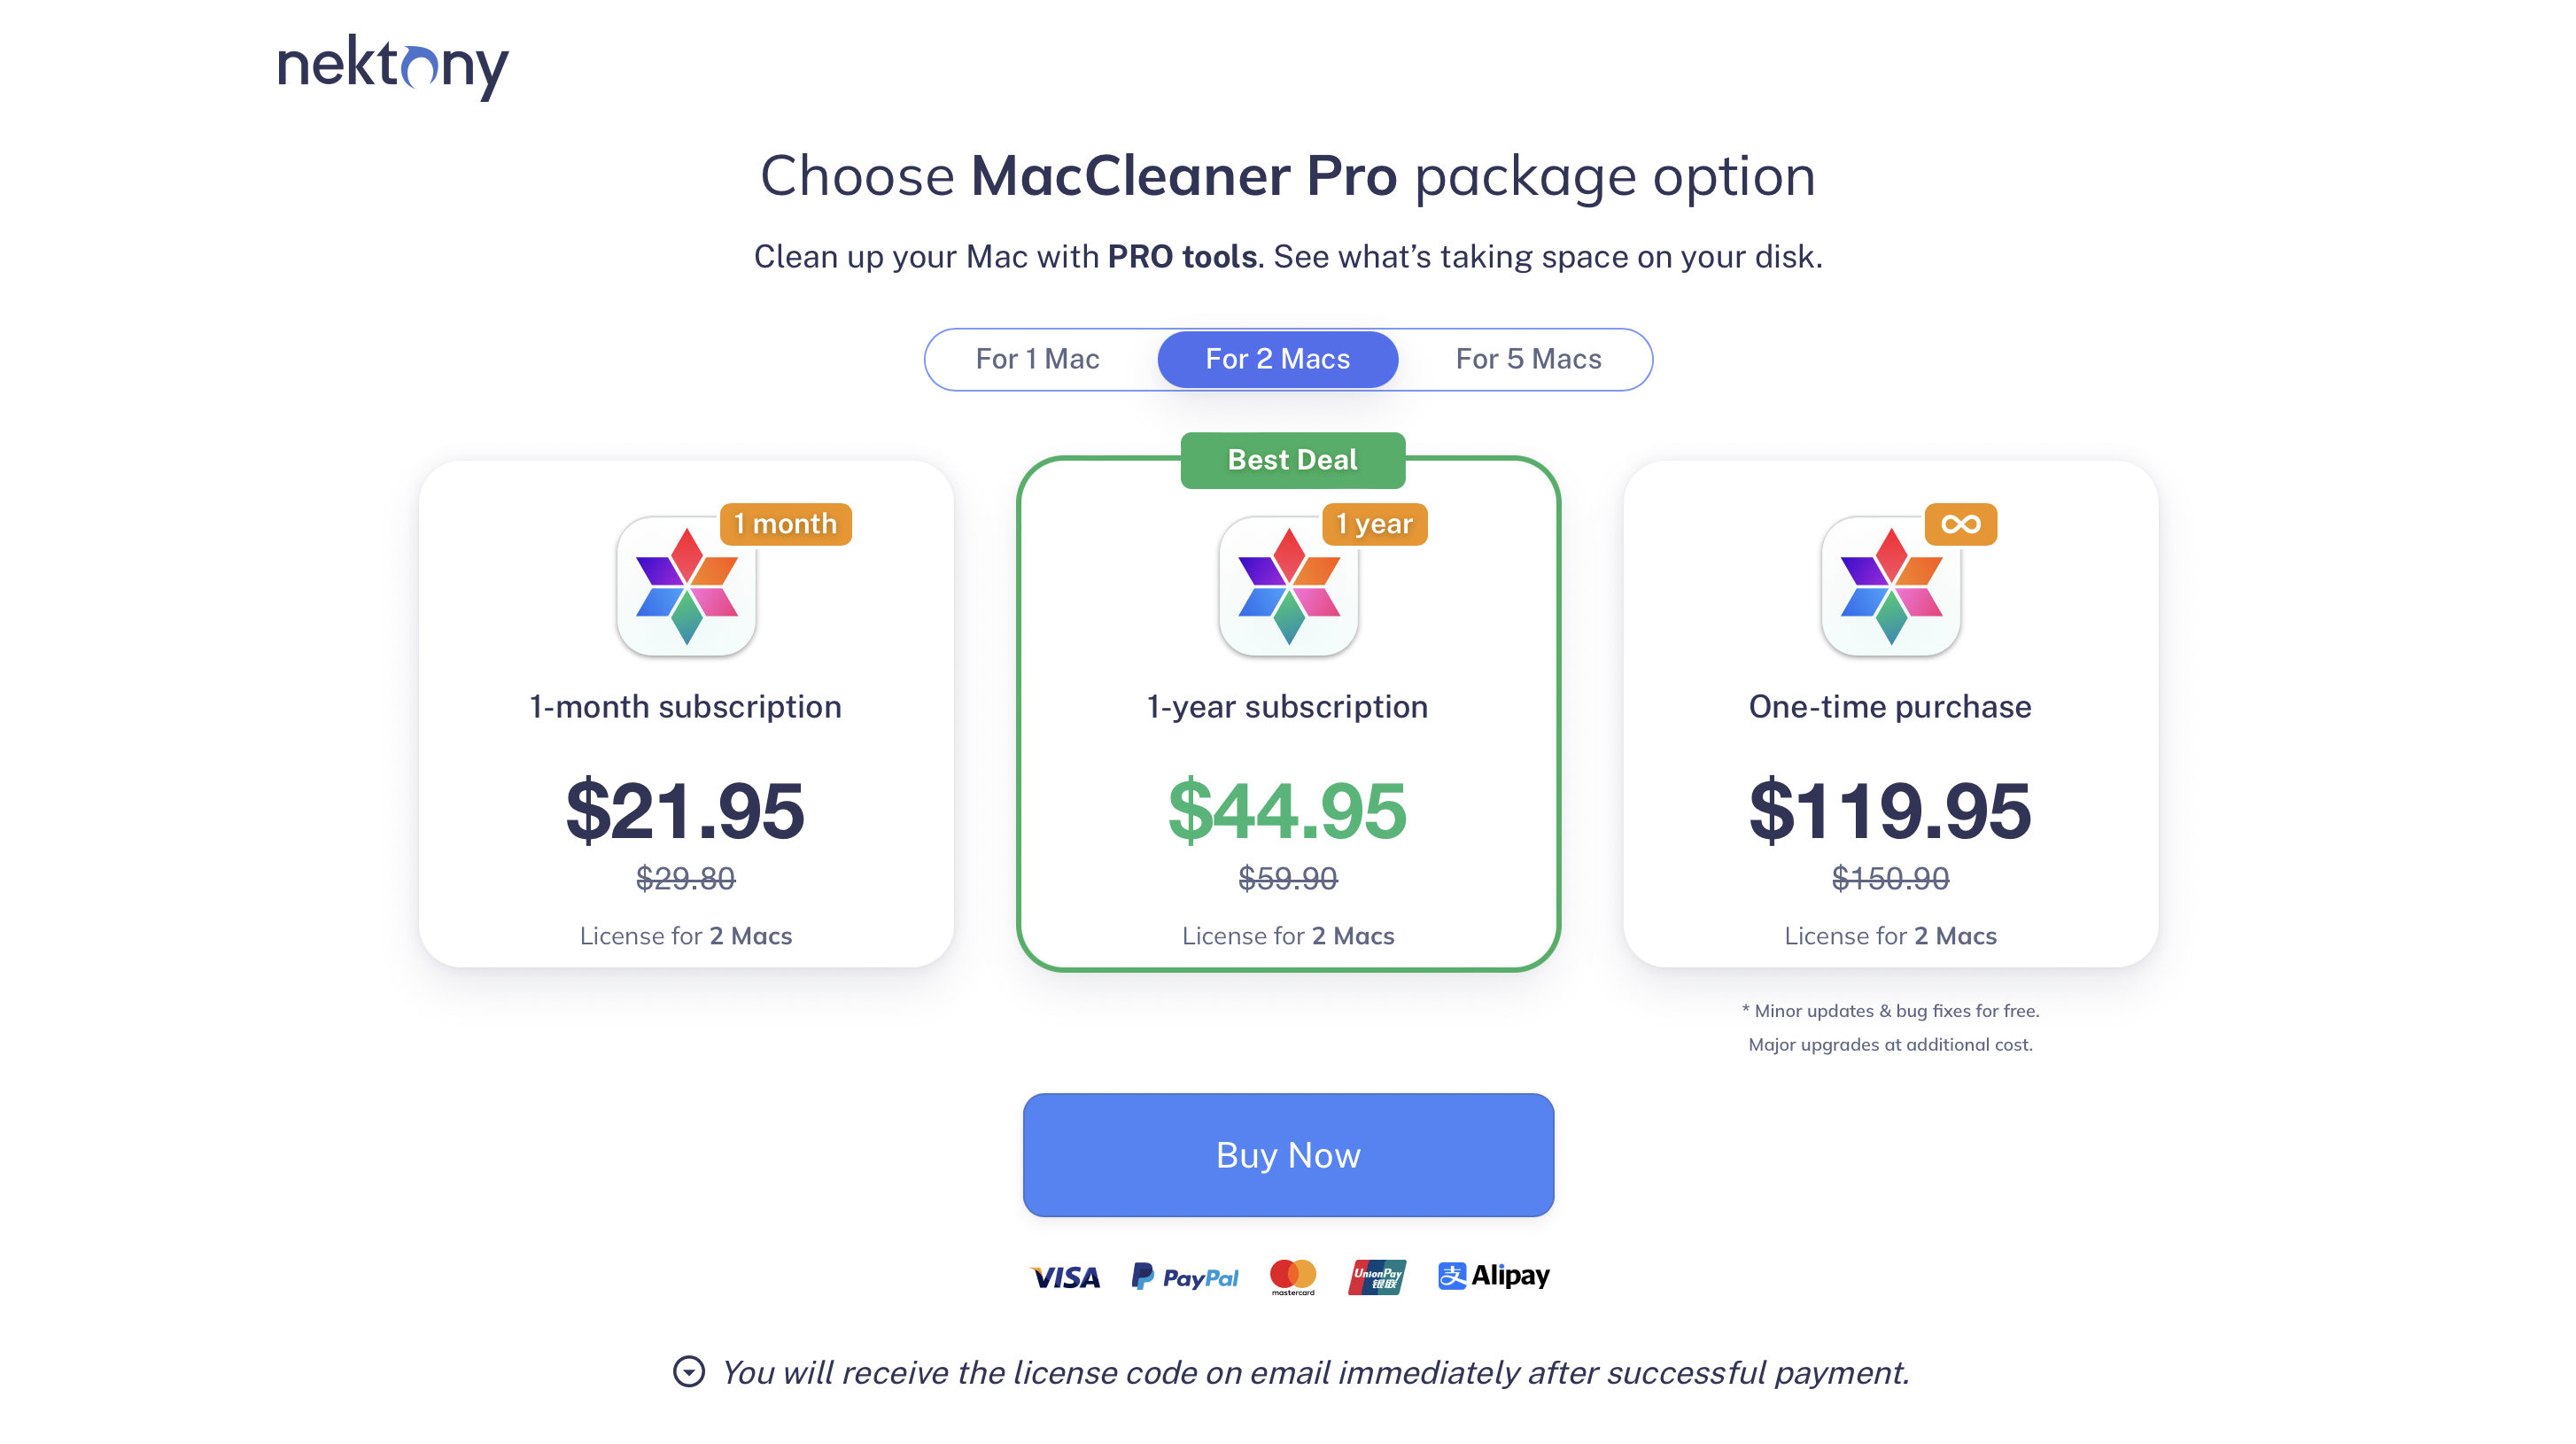 MacCleaner Pro Pricing